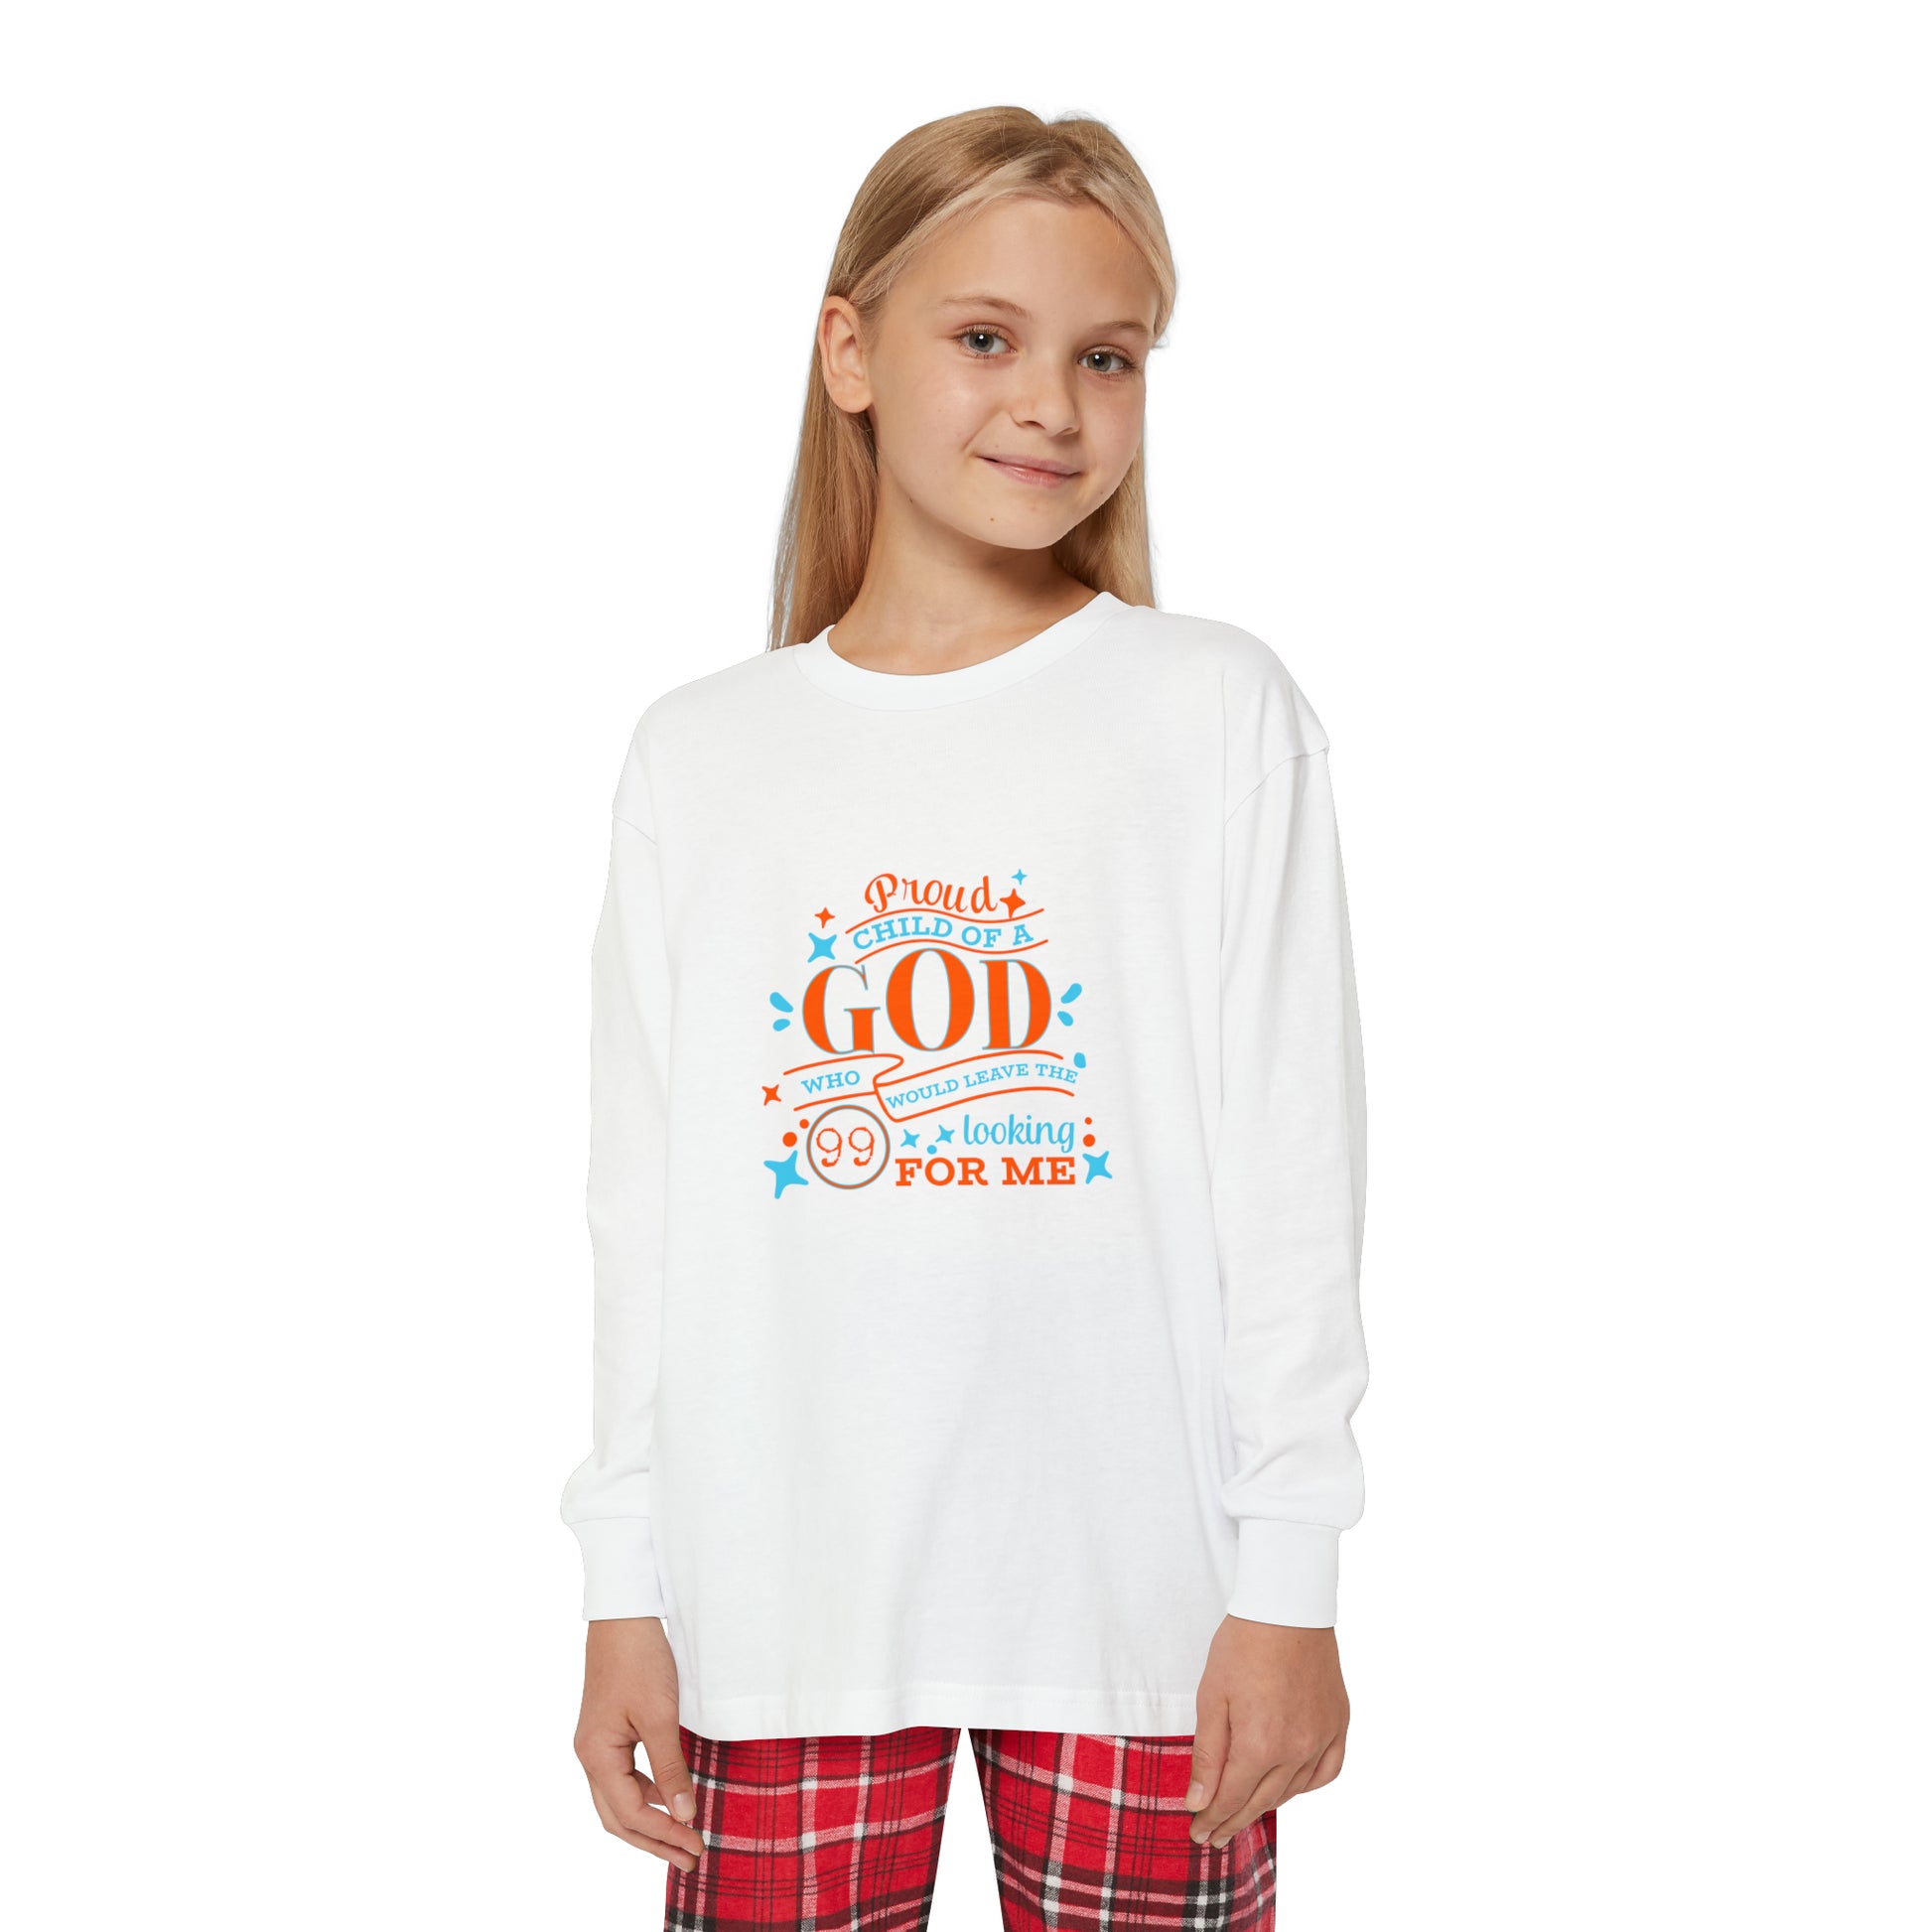 Proud Child Of A God Who Would Leave The 99 Looking For Me Youth Christian Long Sleeve Pajama Set Printify